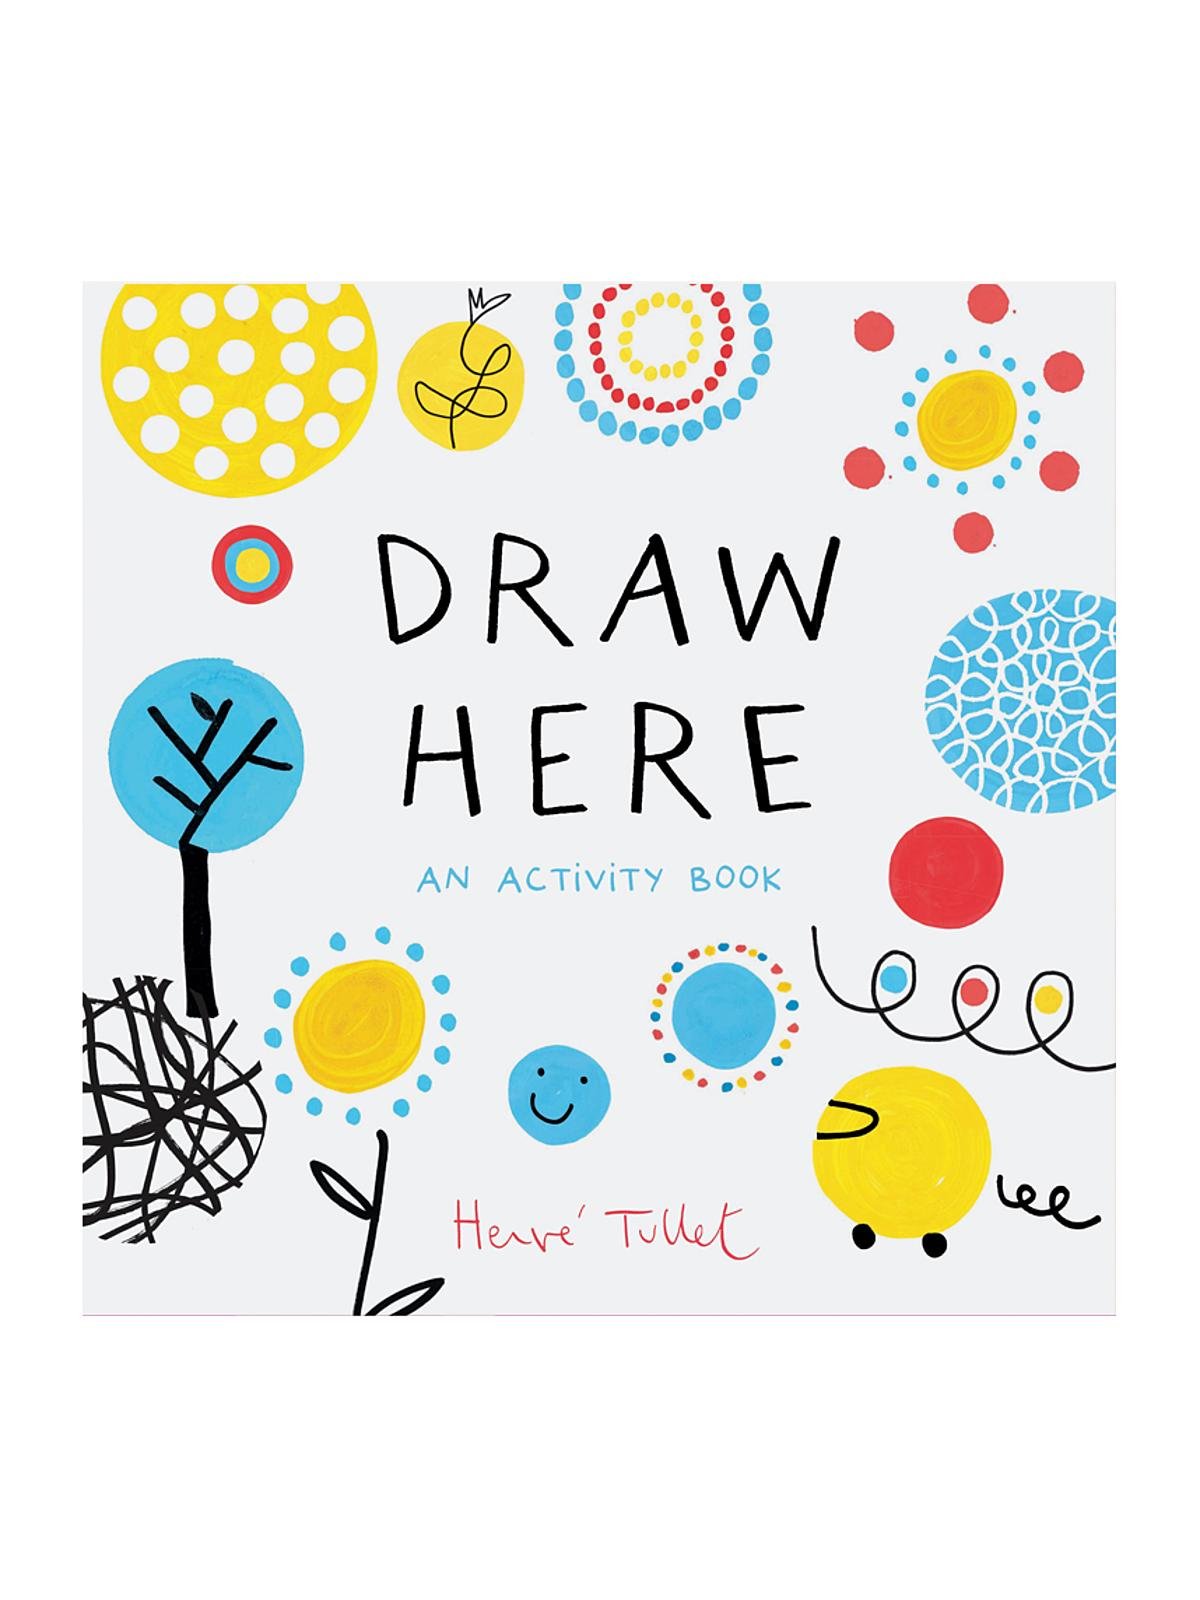 Chronicle Books - Draw Here